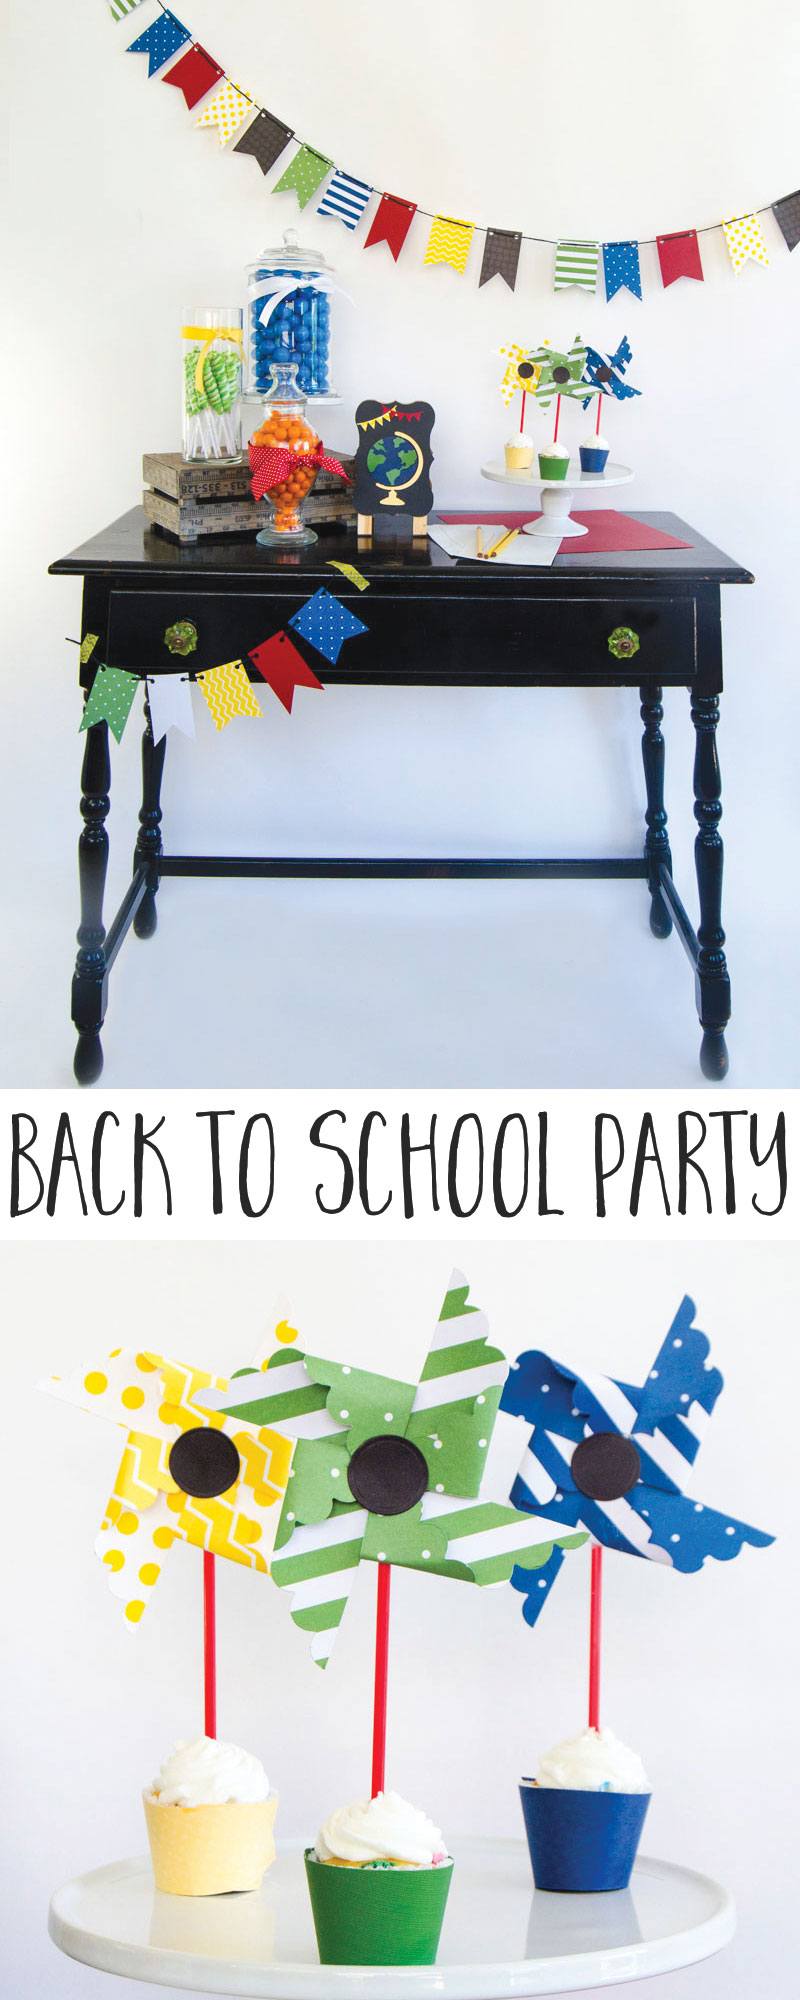 Back To School Ideas by Lindi Haws of Love The Day